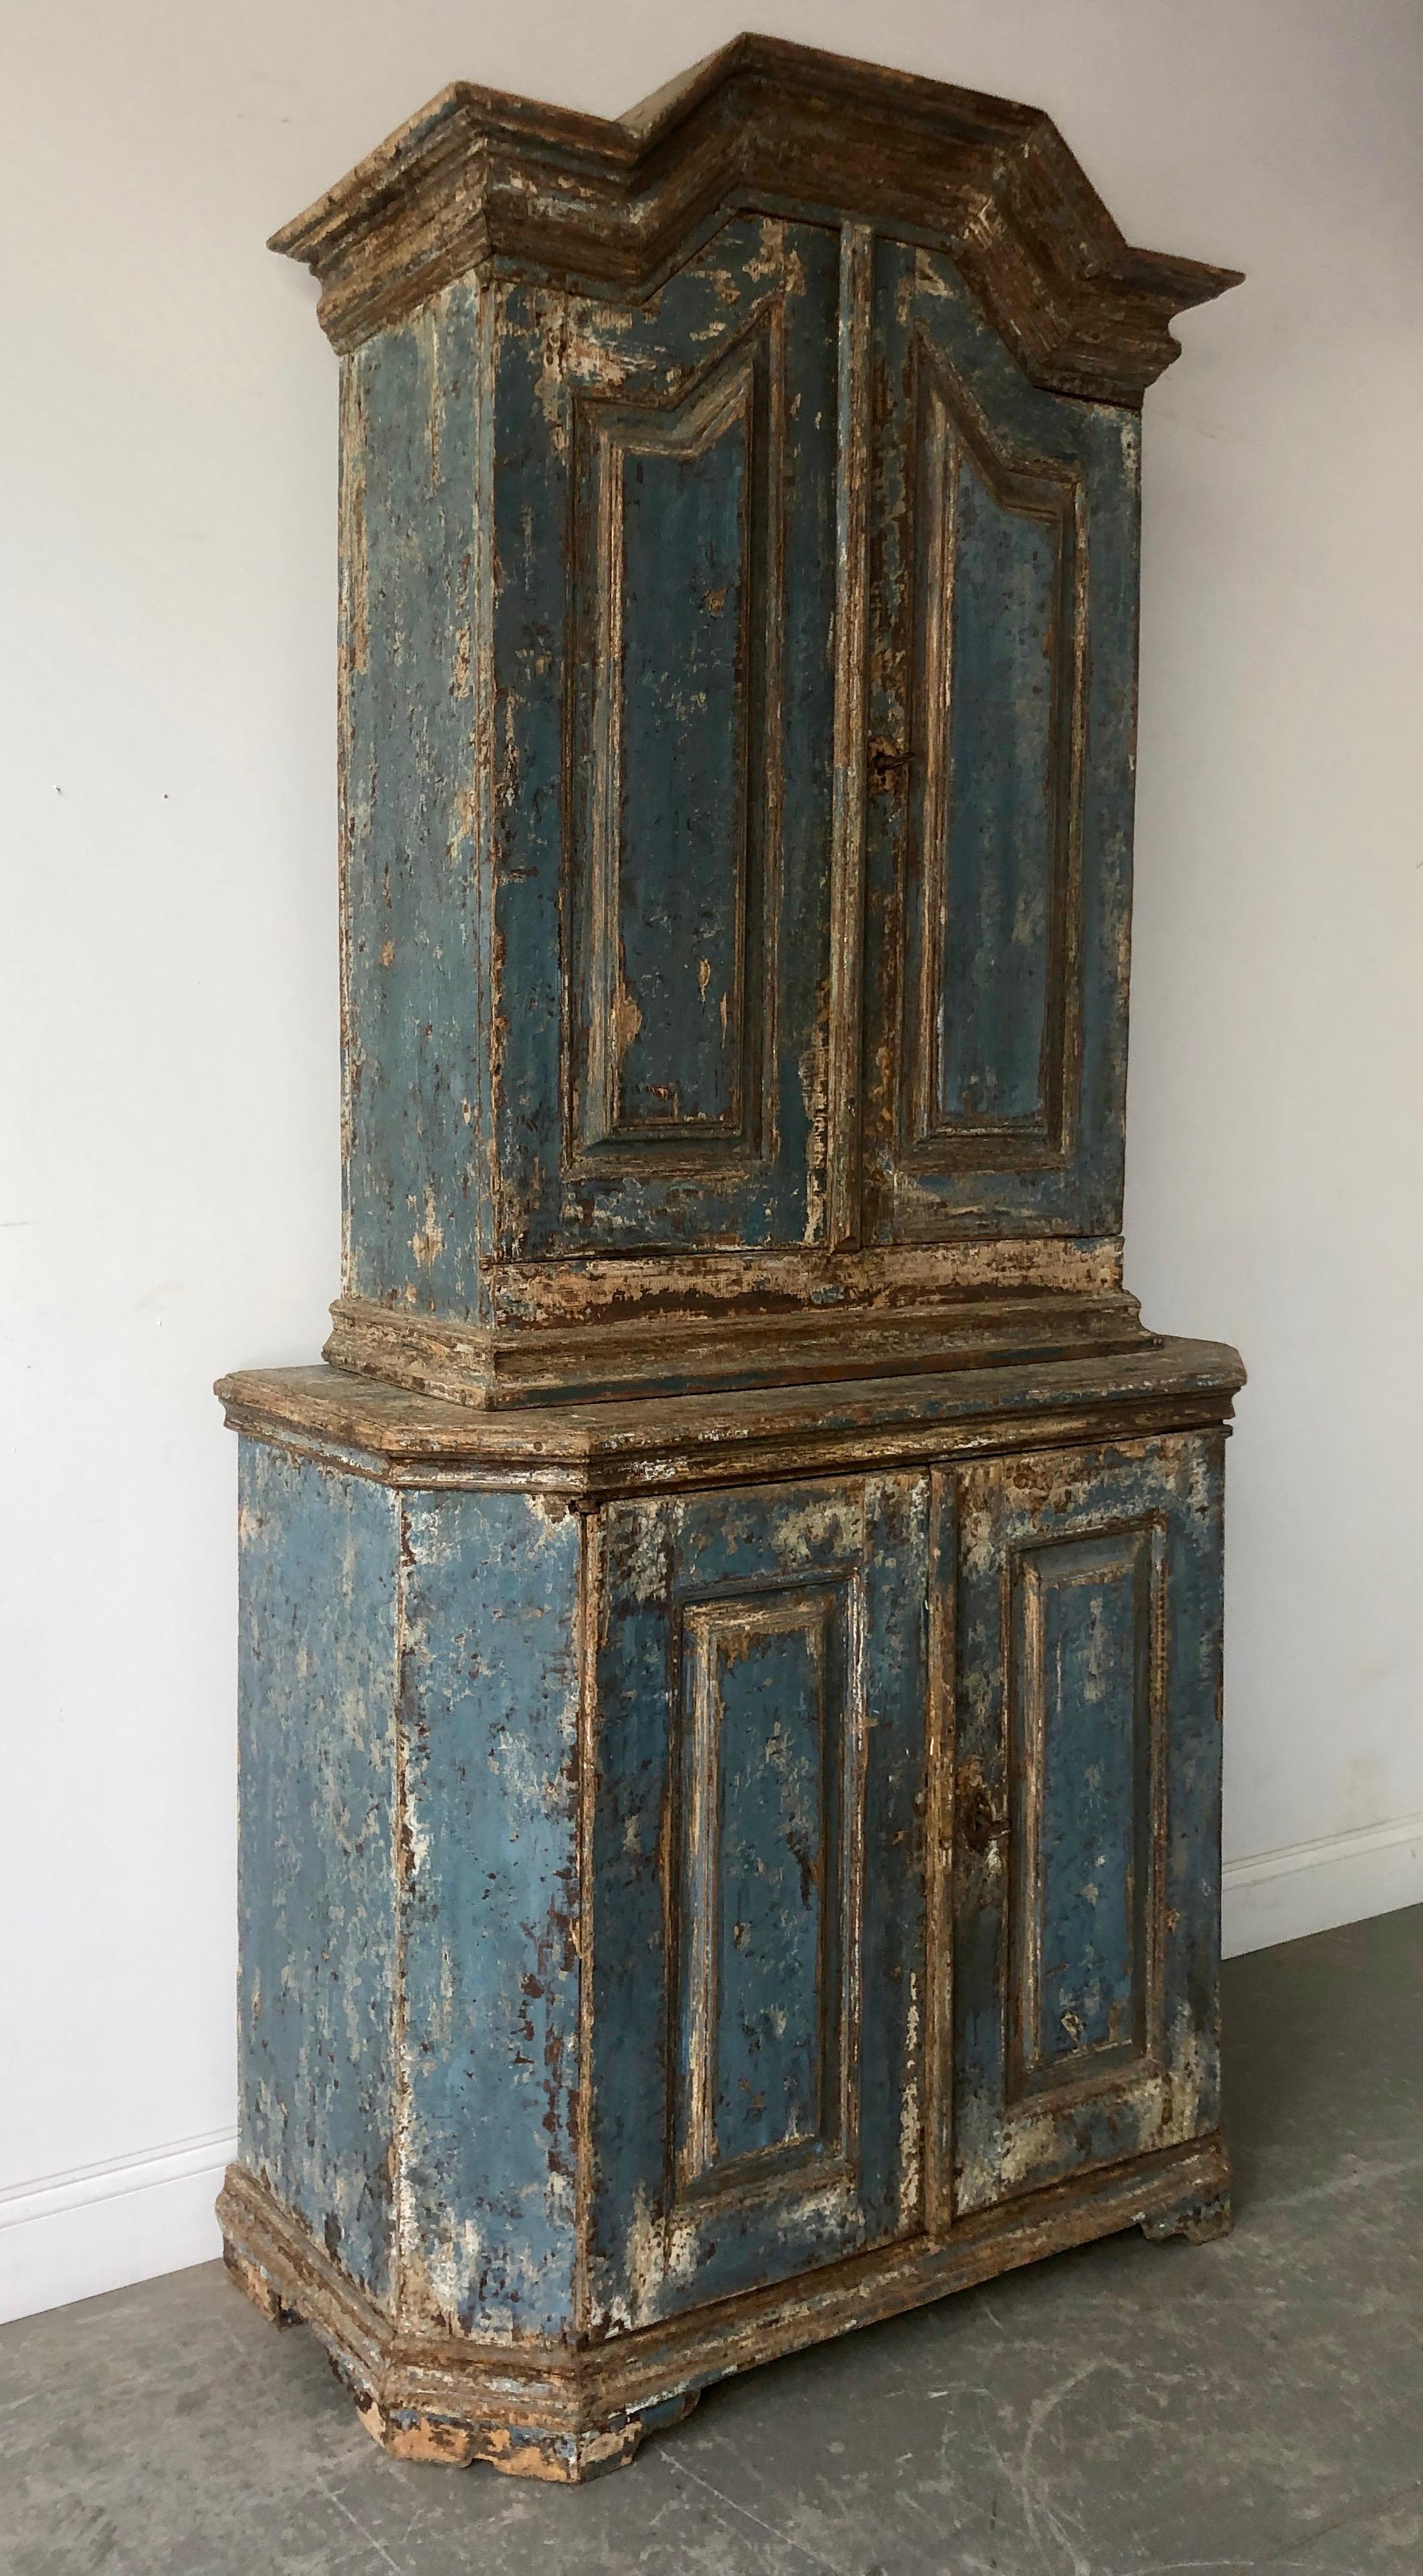 Very handsome late 17th century Swedish Baroque cabinet in two parts with a brilliant original blue patina and all original hardwares.
Dalarna, Sweden.